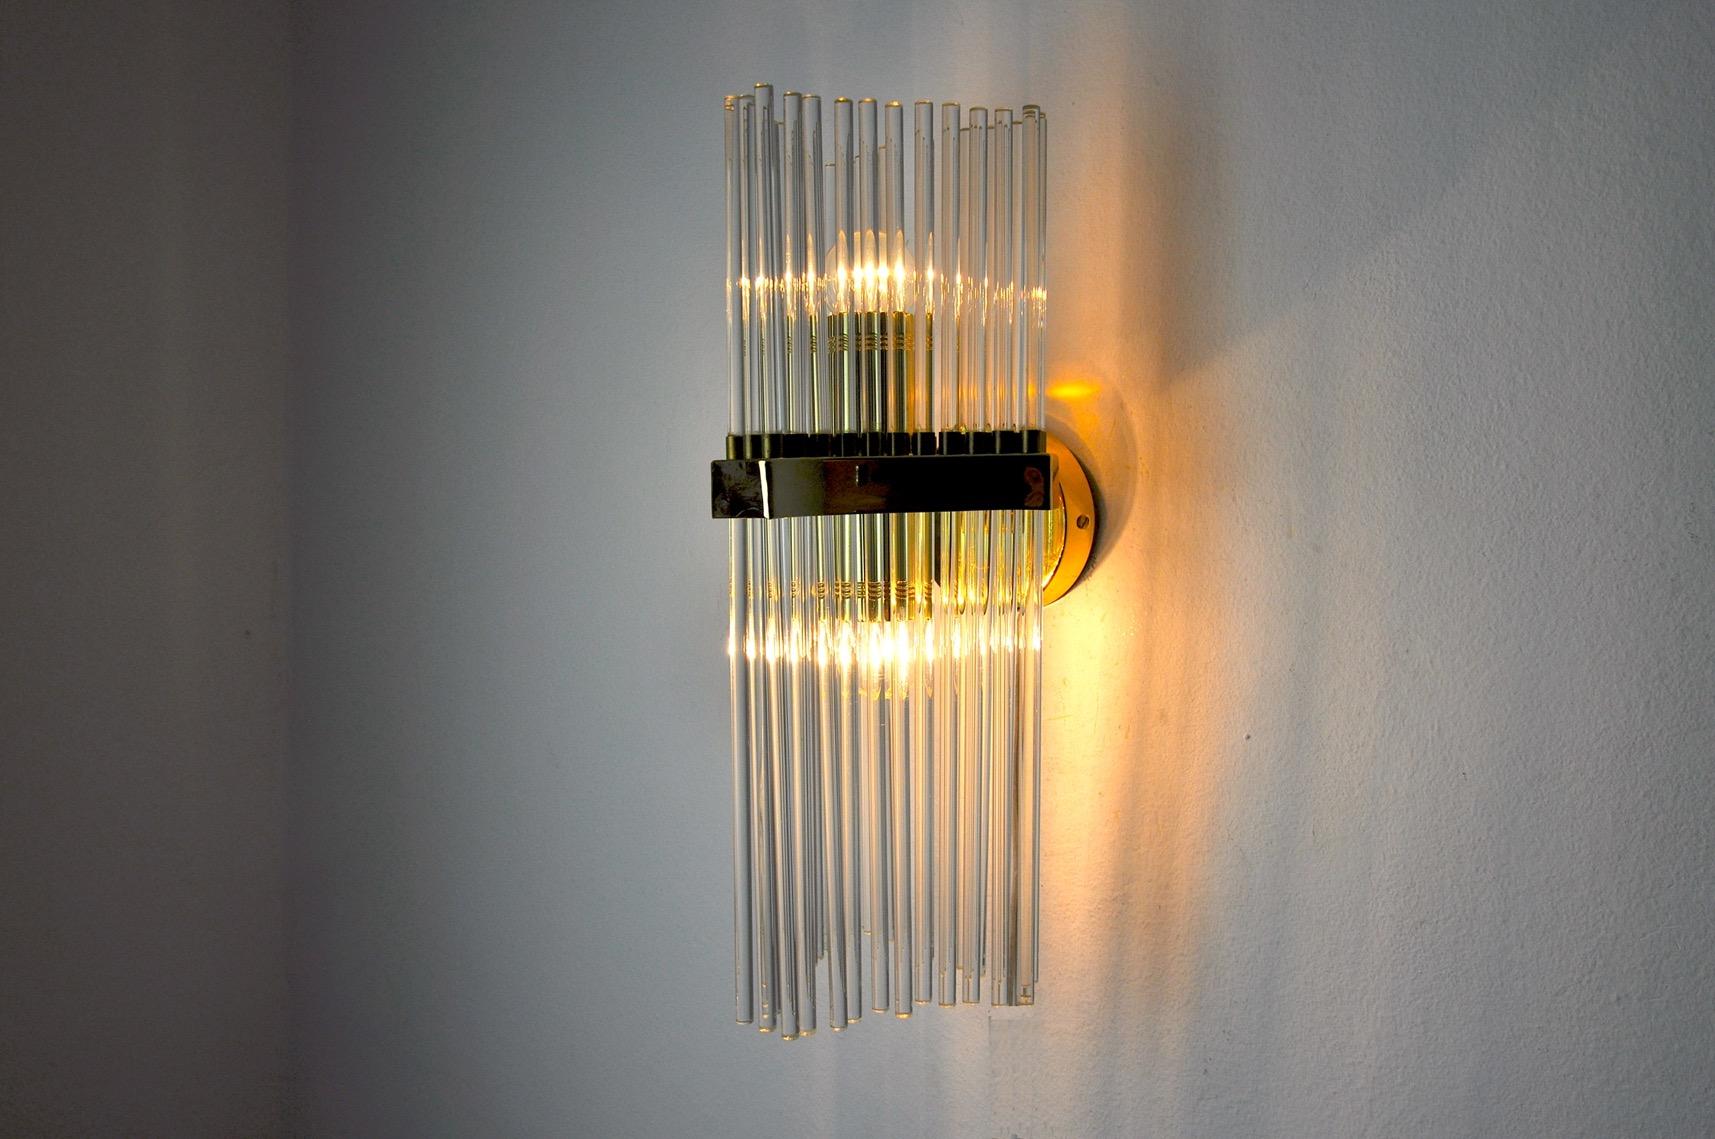 Superb and rare wall lamp of the house sciolari for Lightolier dating from 1970.
Composed of crystal rods and a Meta gold structure, this wall lamp is spectacular.
Rare design object that will illuminate your interior perfectly.
Electricity checked,